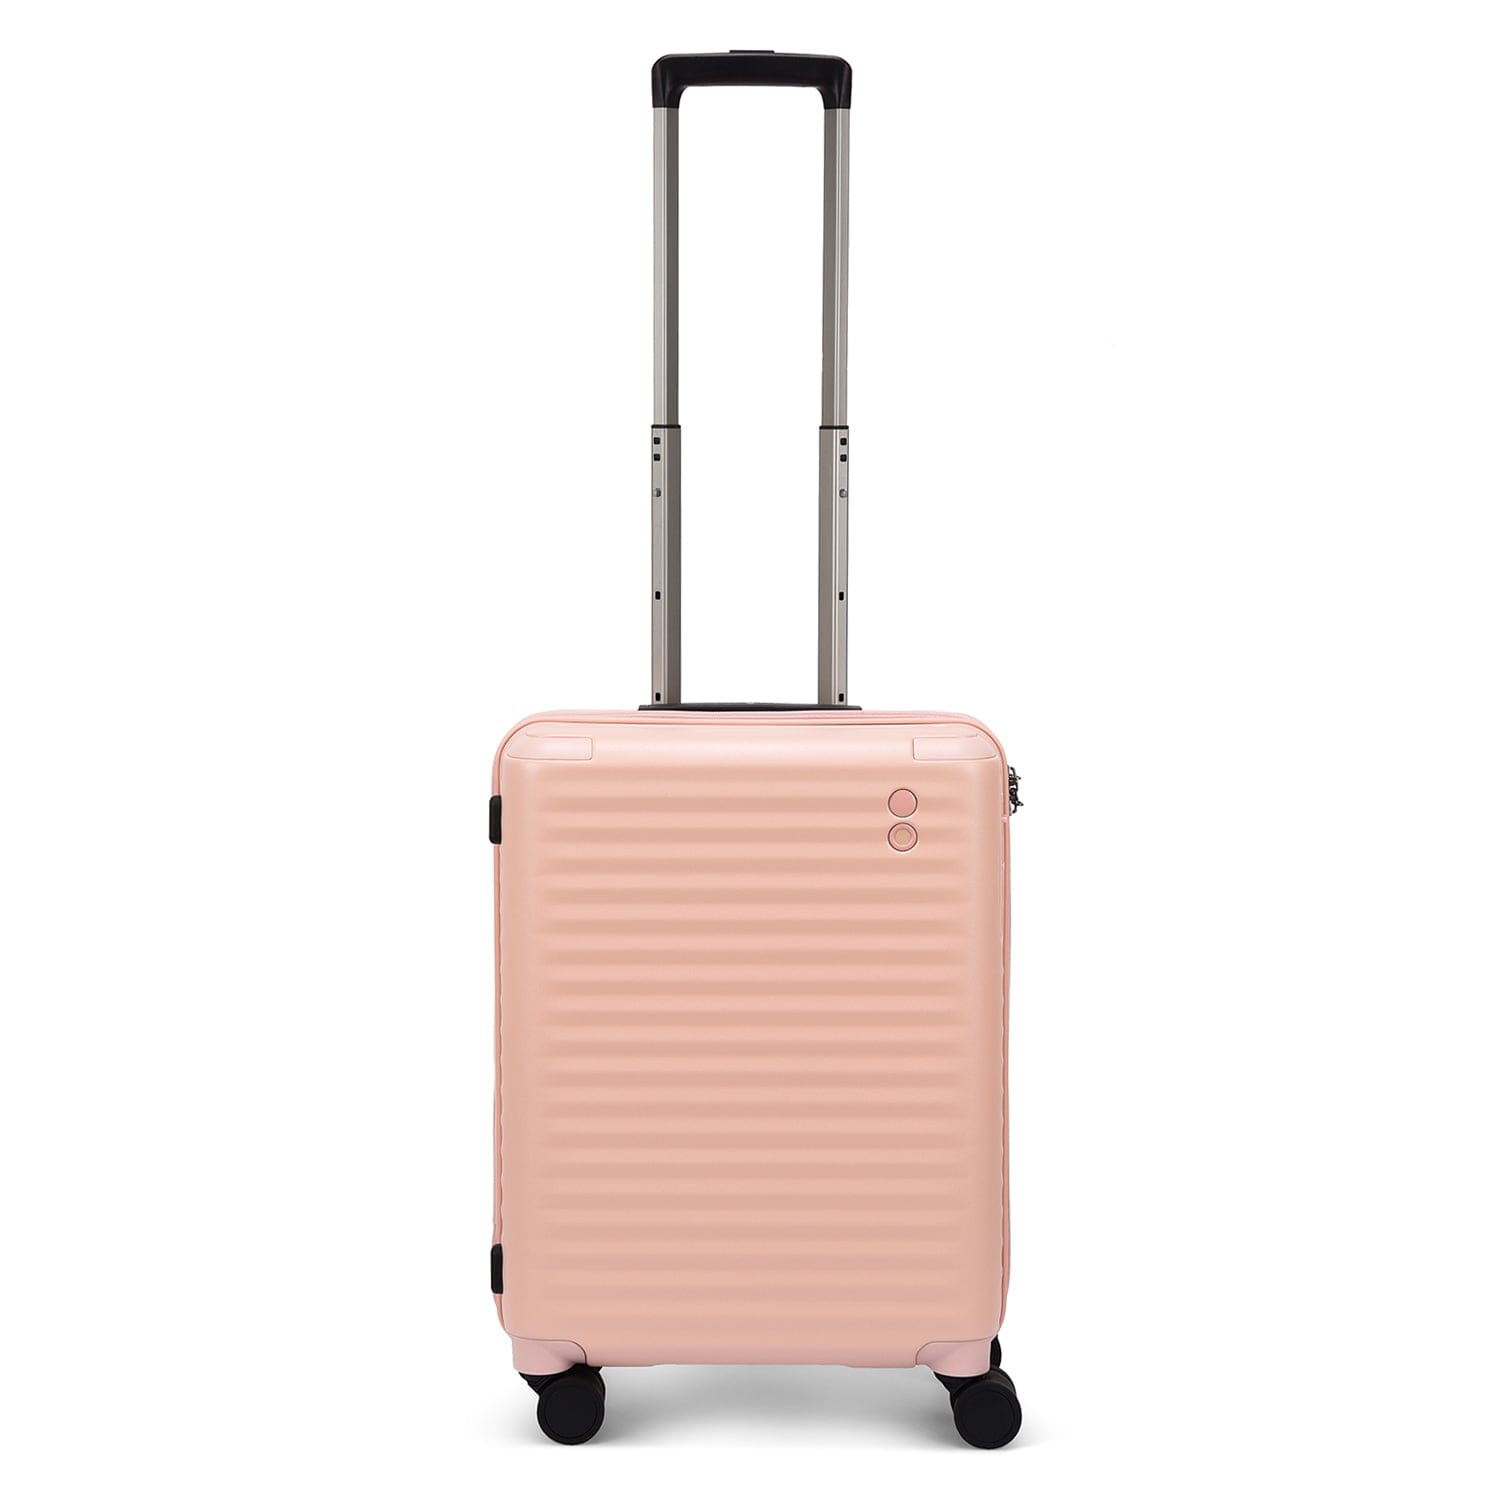 Echolac Celestra 55cm Hardcase Non-Expandable 4 Double Wheel Cabin Luggage Trolley Pink - PC183XA PINK 20